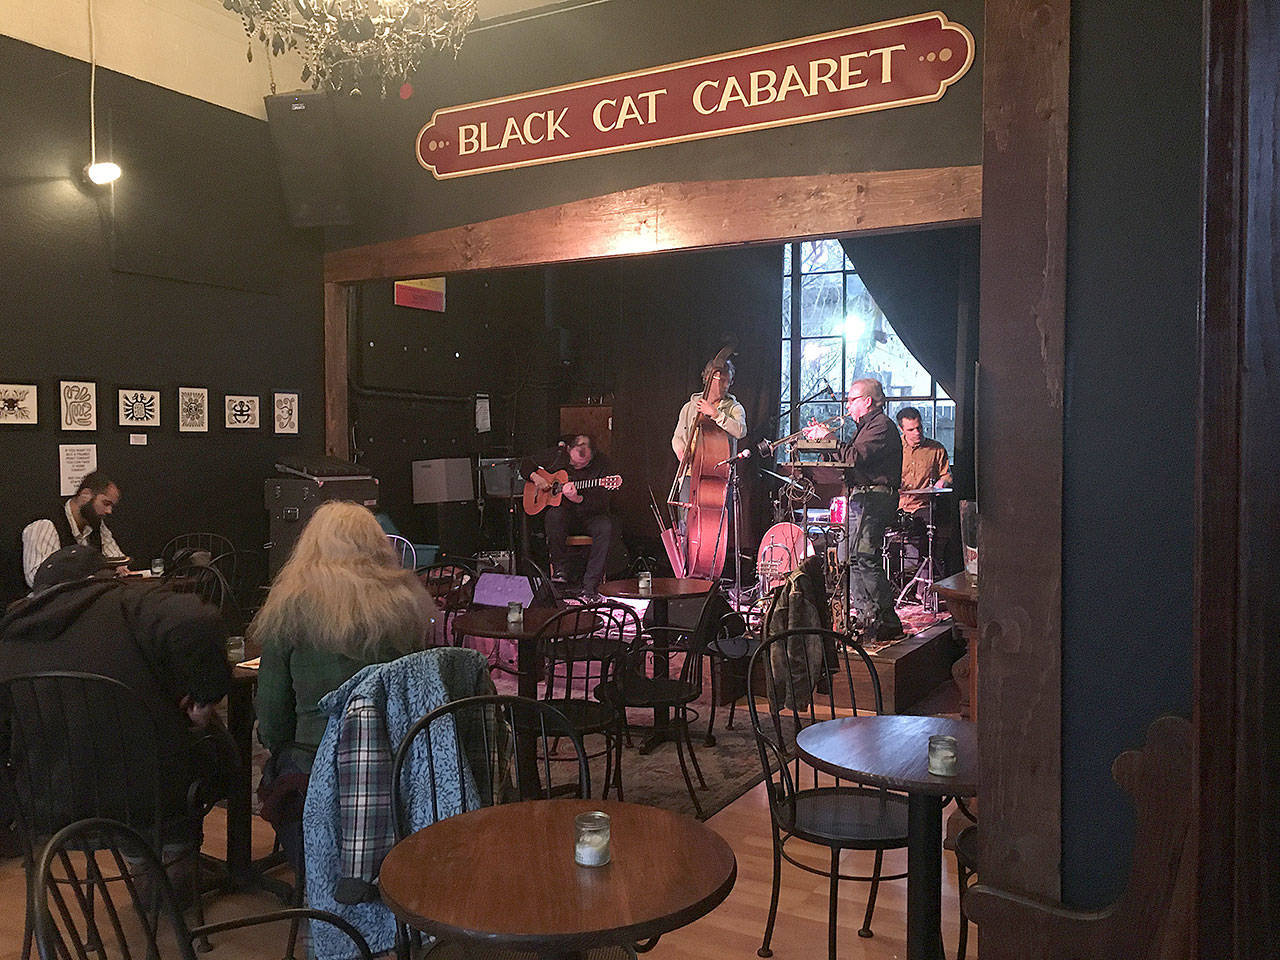 The island jazz band, Som’tet, played one of the final live concerts at the Black Cat Cabaret before the venue’s closing (Elizabeth Shepherd Photo).